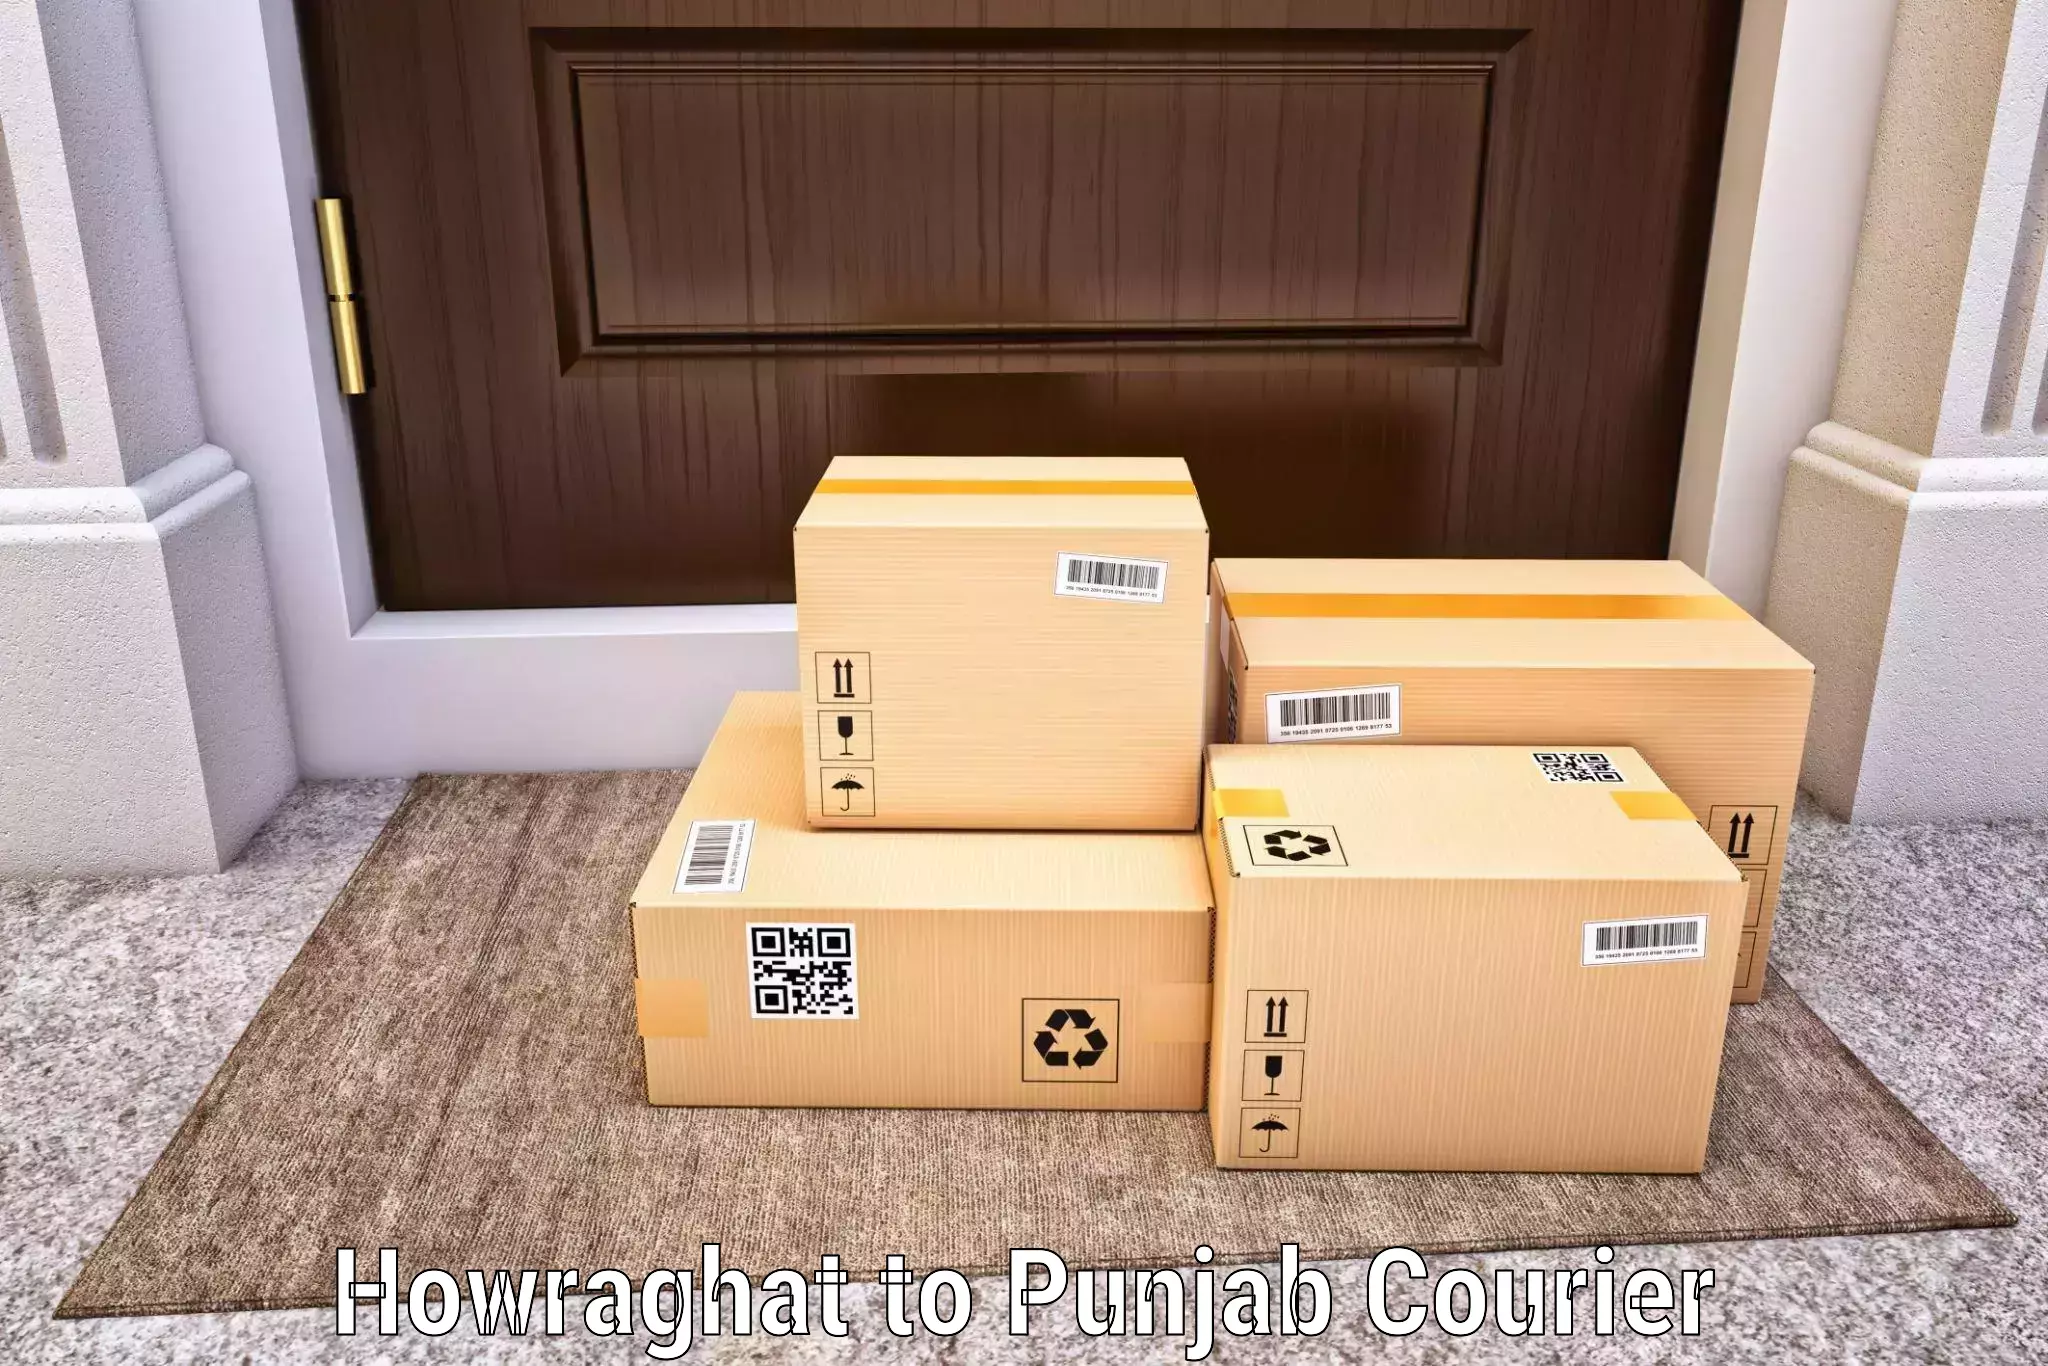 Expedited parcel delivery Howraghat to Fatehgarh Sahib